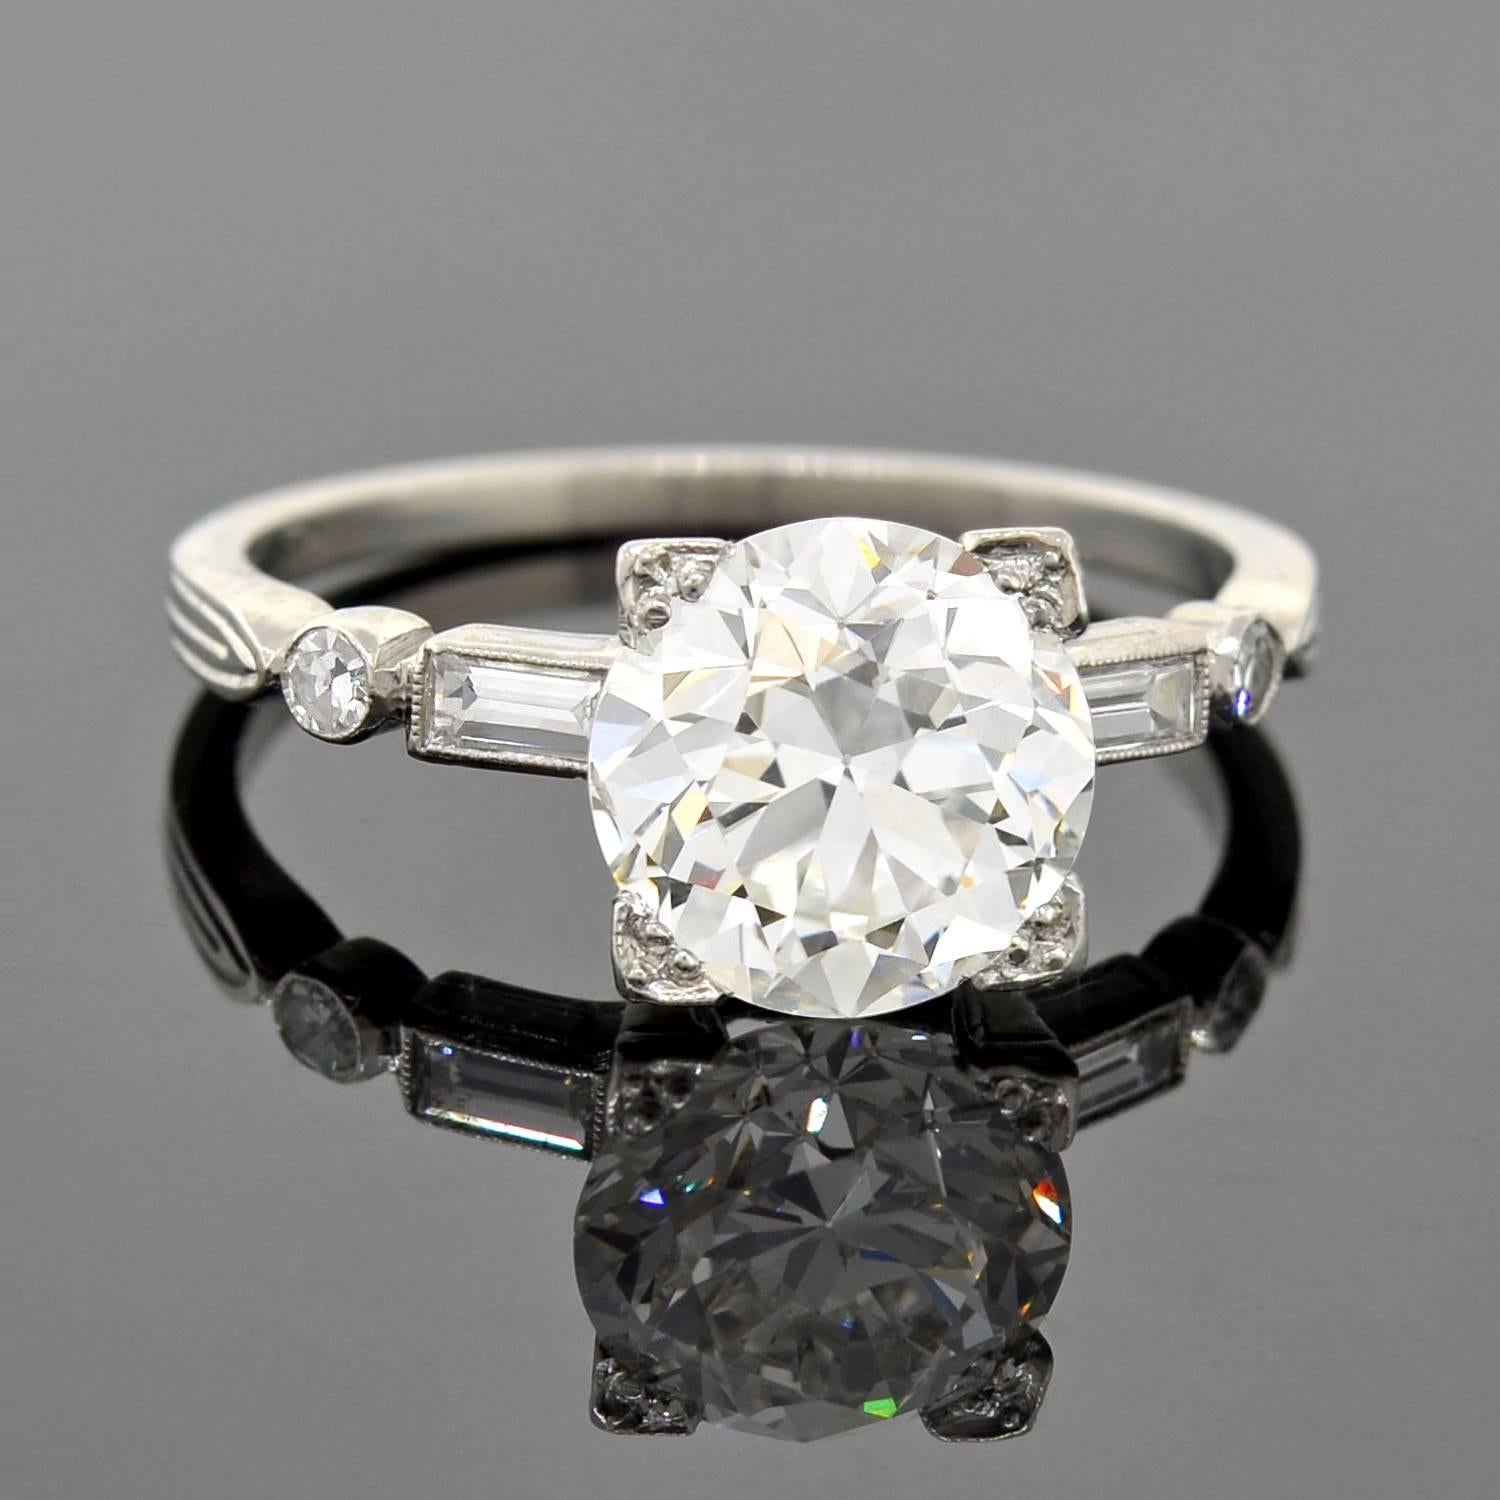 An exquisite diamond engagement ring from the late Art Deco (ca1930s) era! This gorgeous piece is made of platinum and holds a sparkling old European cut diamond at the center of its lovely setting. The center diamond is held within a box prong